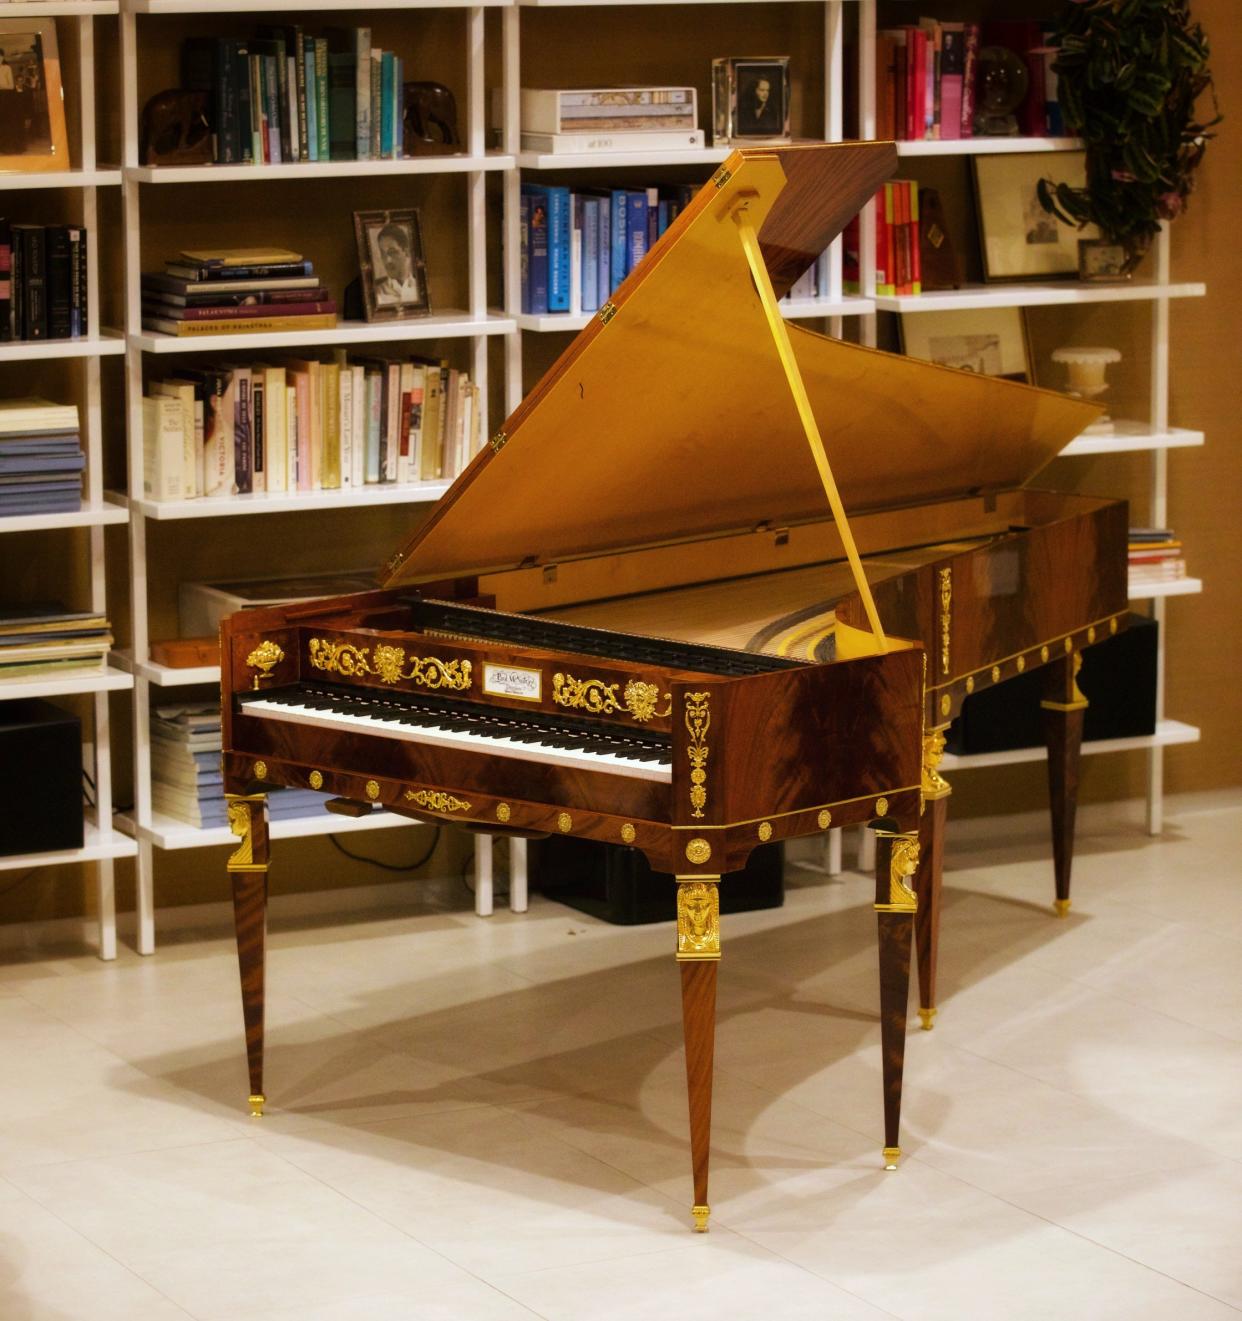 One piece in Dr. Charles Metz's collection is a Viennese Fortepiano copy of an 1805 Anton Walter instrument.